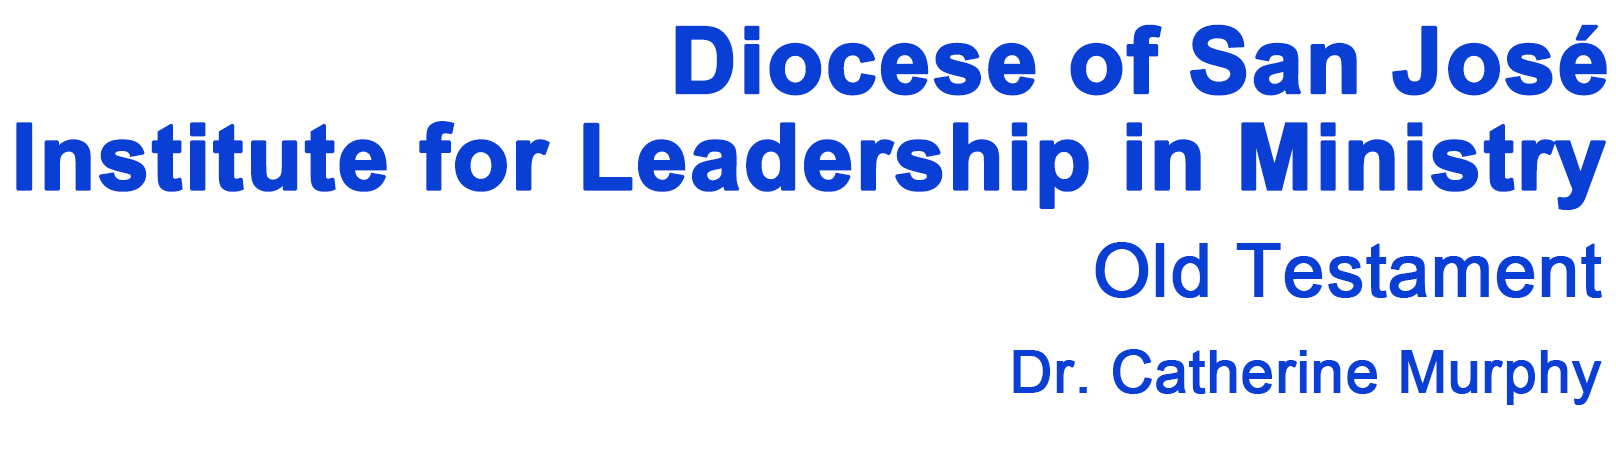 Diocese of San José, Institute for Leadership in Ministry